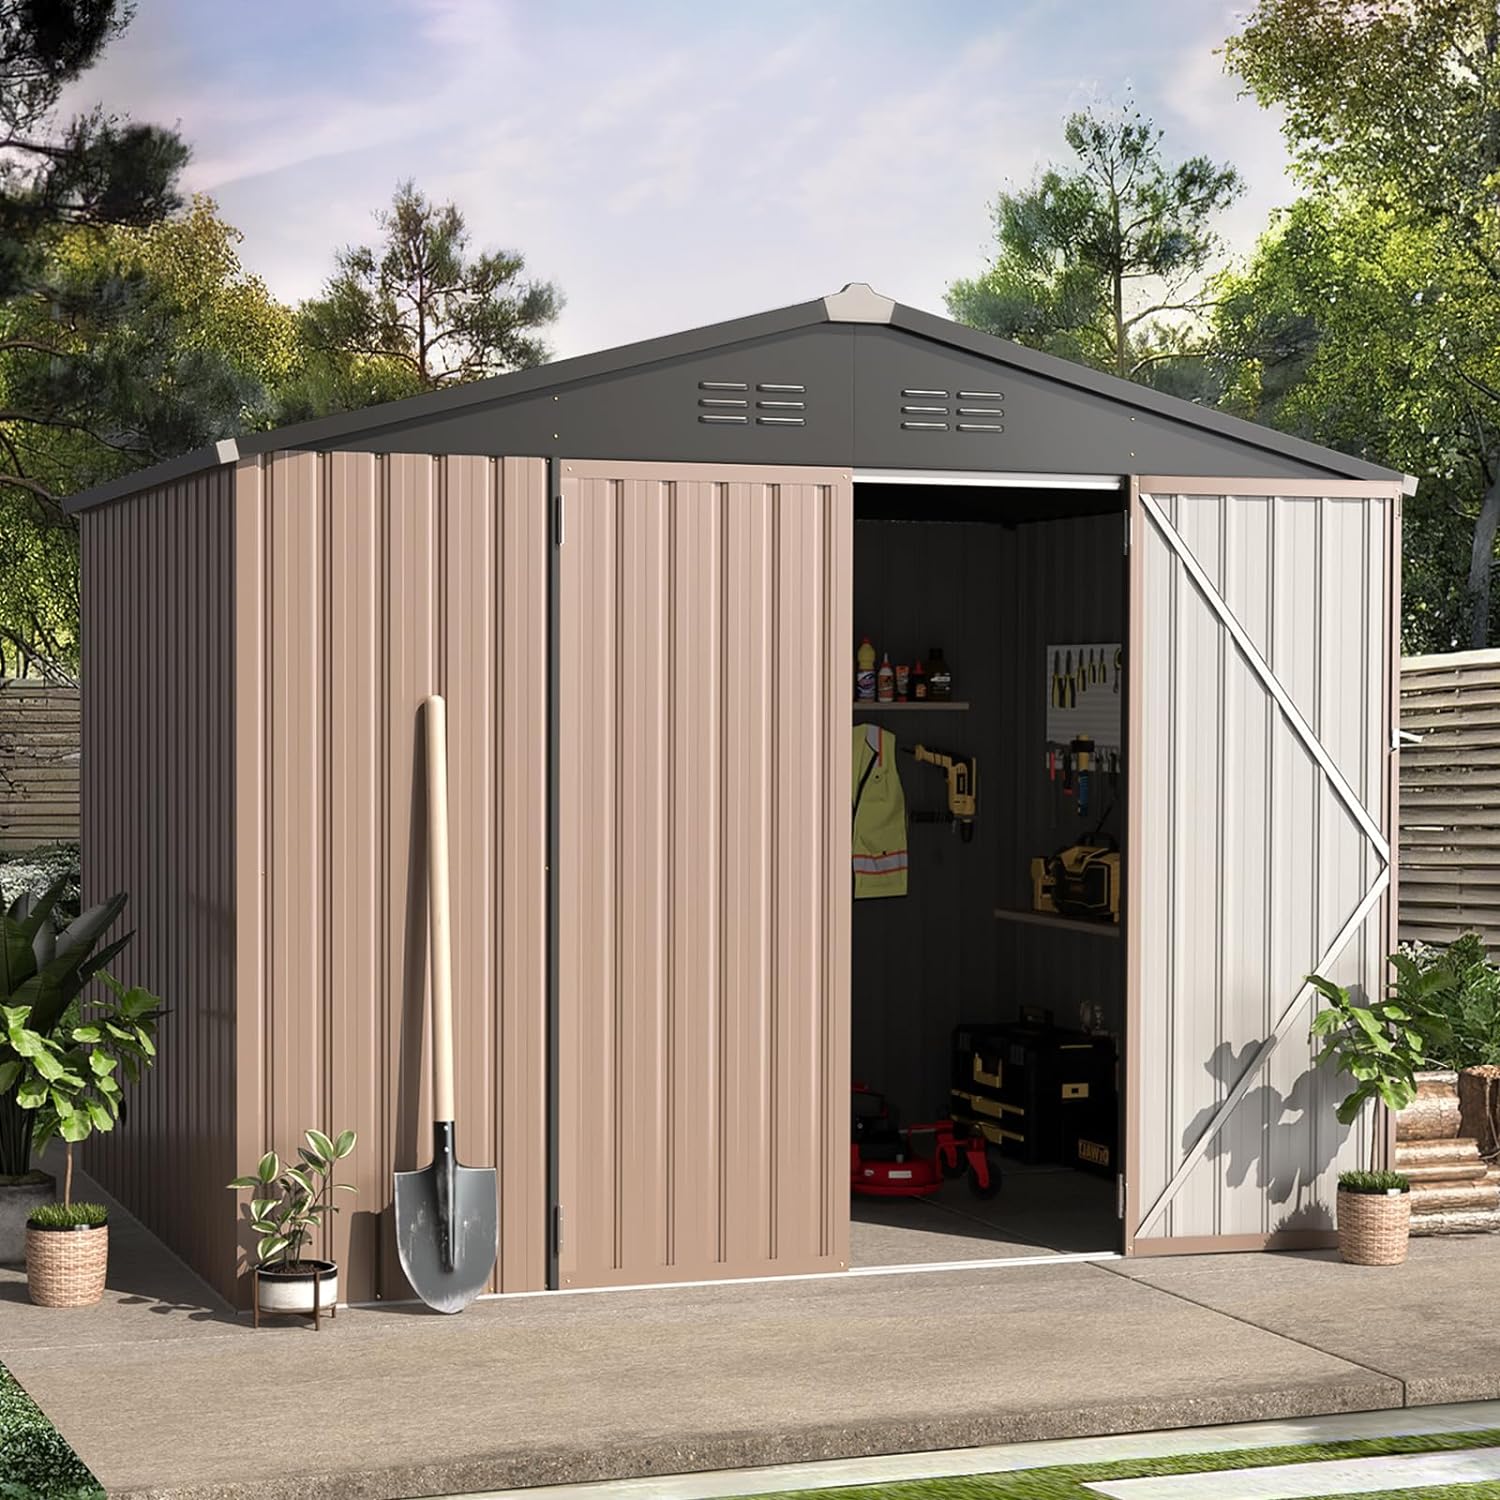 AECOJOY 8' x 6' Metal Storage Shed for Ourdoor, Steel Yard Shed (53 Sq.Ft Land) with Design of Lockable Doors, Utility and Tool Storage for Garden, Backyard, Patio, Outside use